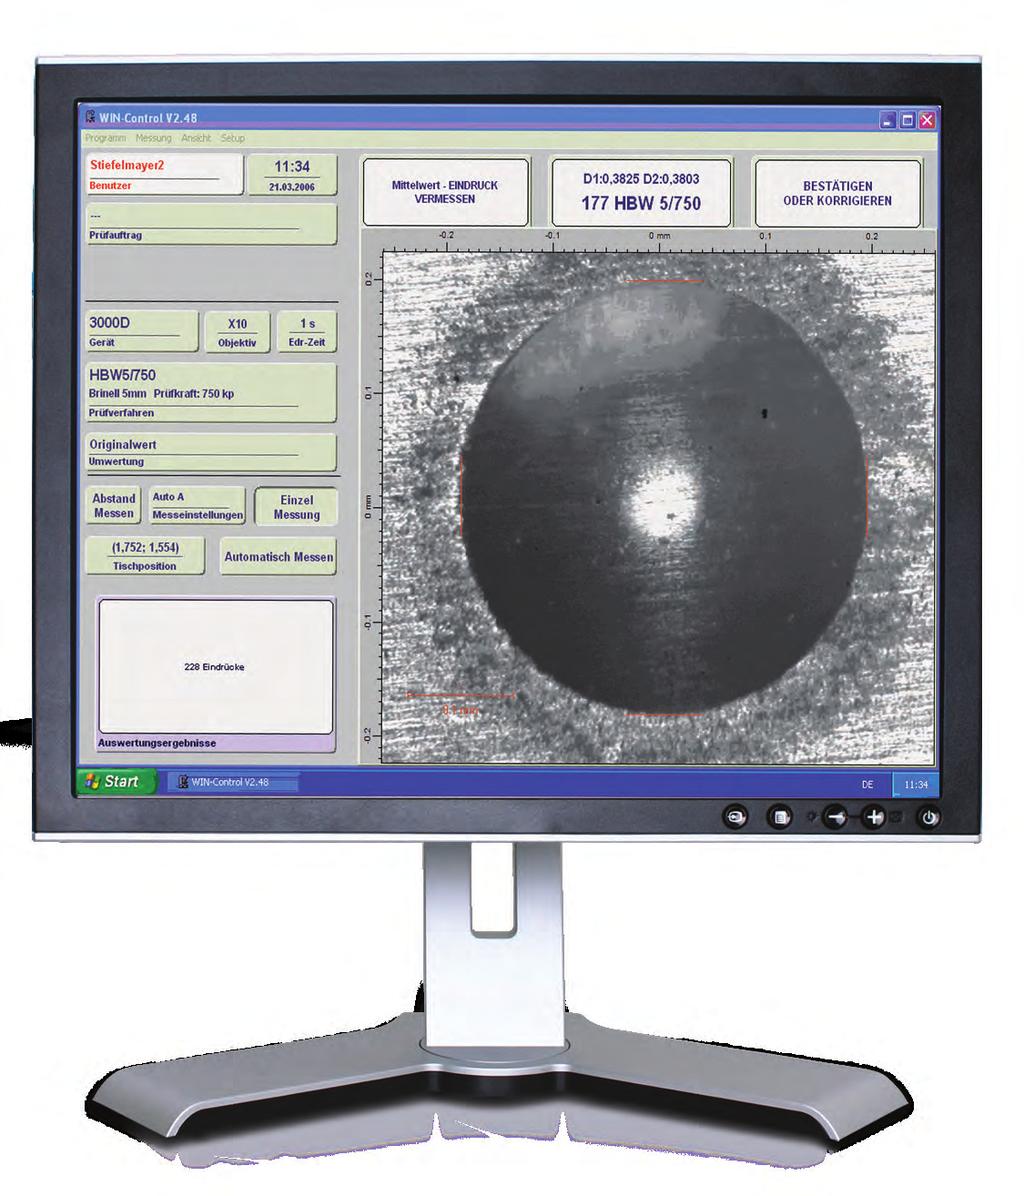 Automation Software for Hardness Testers WIN-Control Automation Software Specifically developed for hardness testing equipment, this automation software